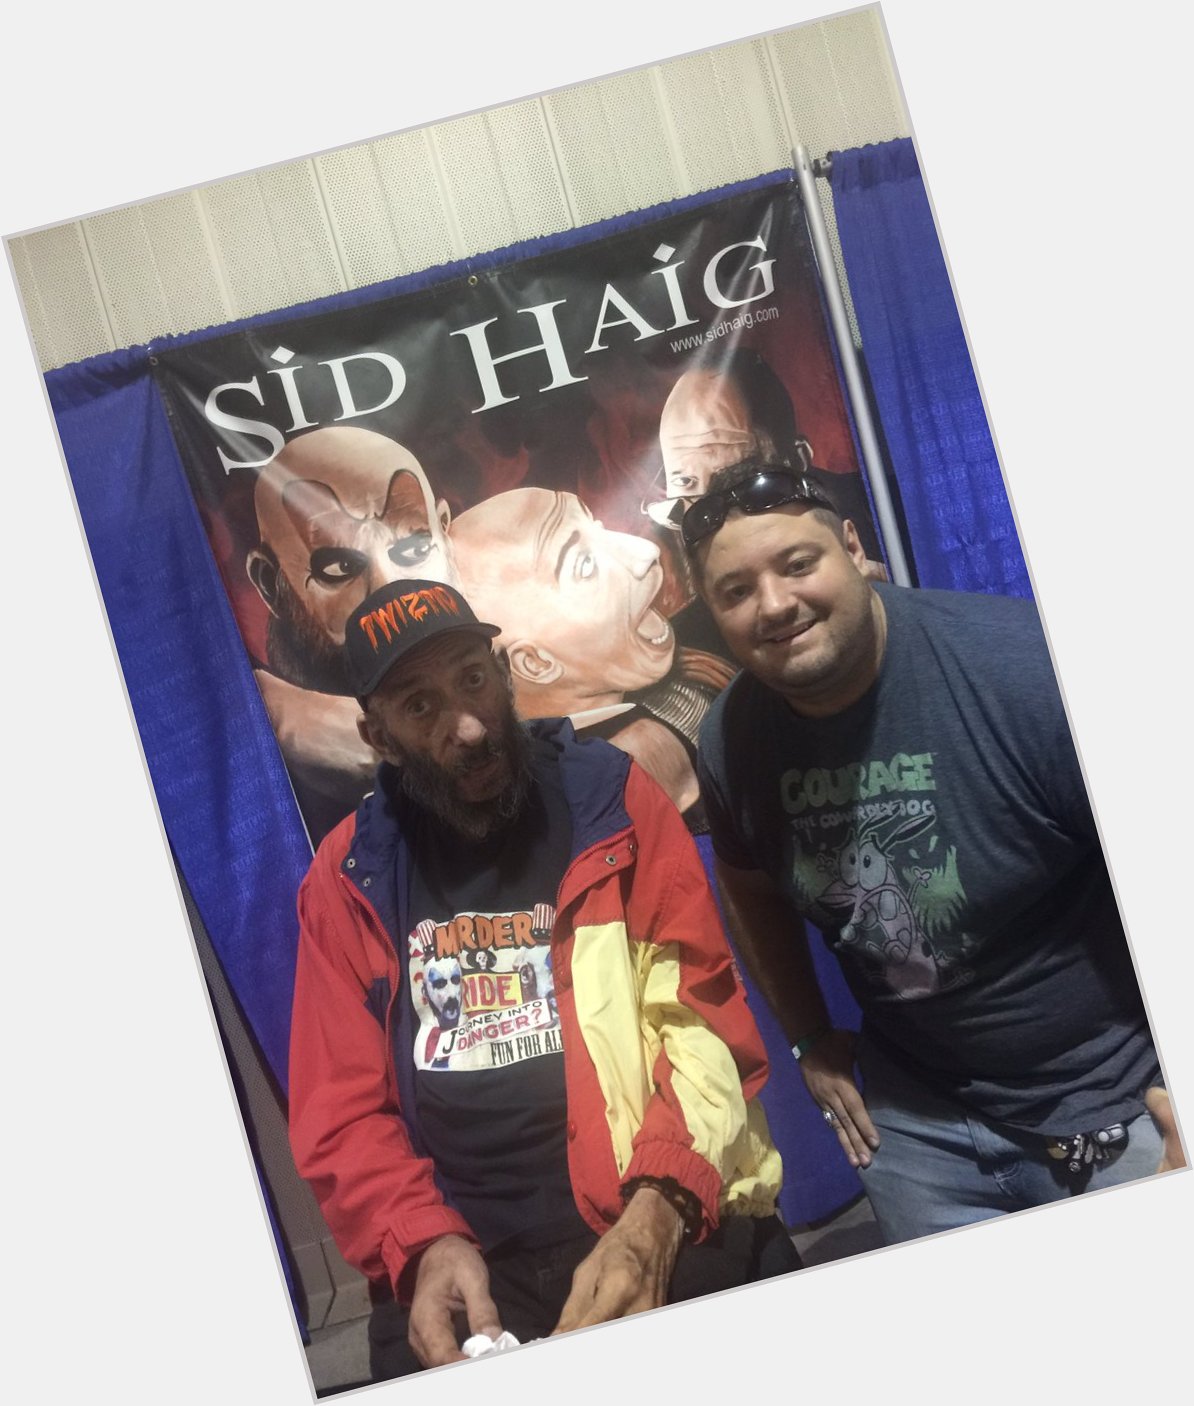 Happy birthday sid haig! Caught him as he finished his cake pop for a sneak pic 